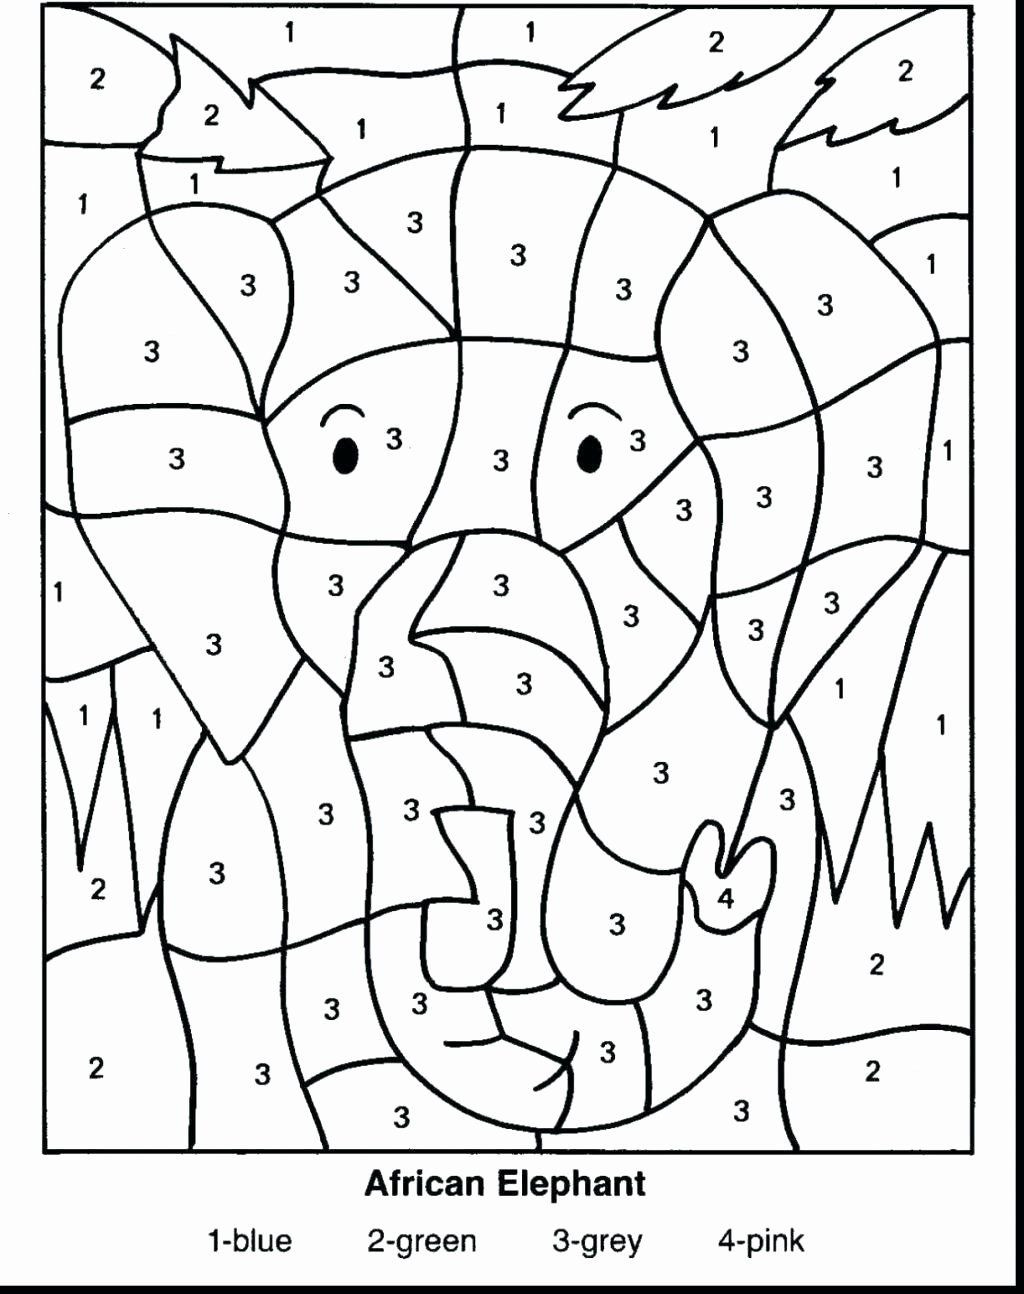 Coloring Worksheets for 2nd Grade Coloring Pages 2nd Grade In 2020